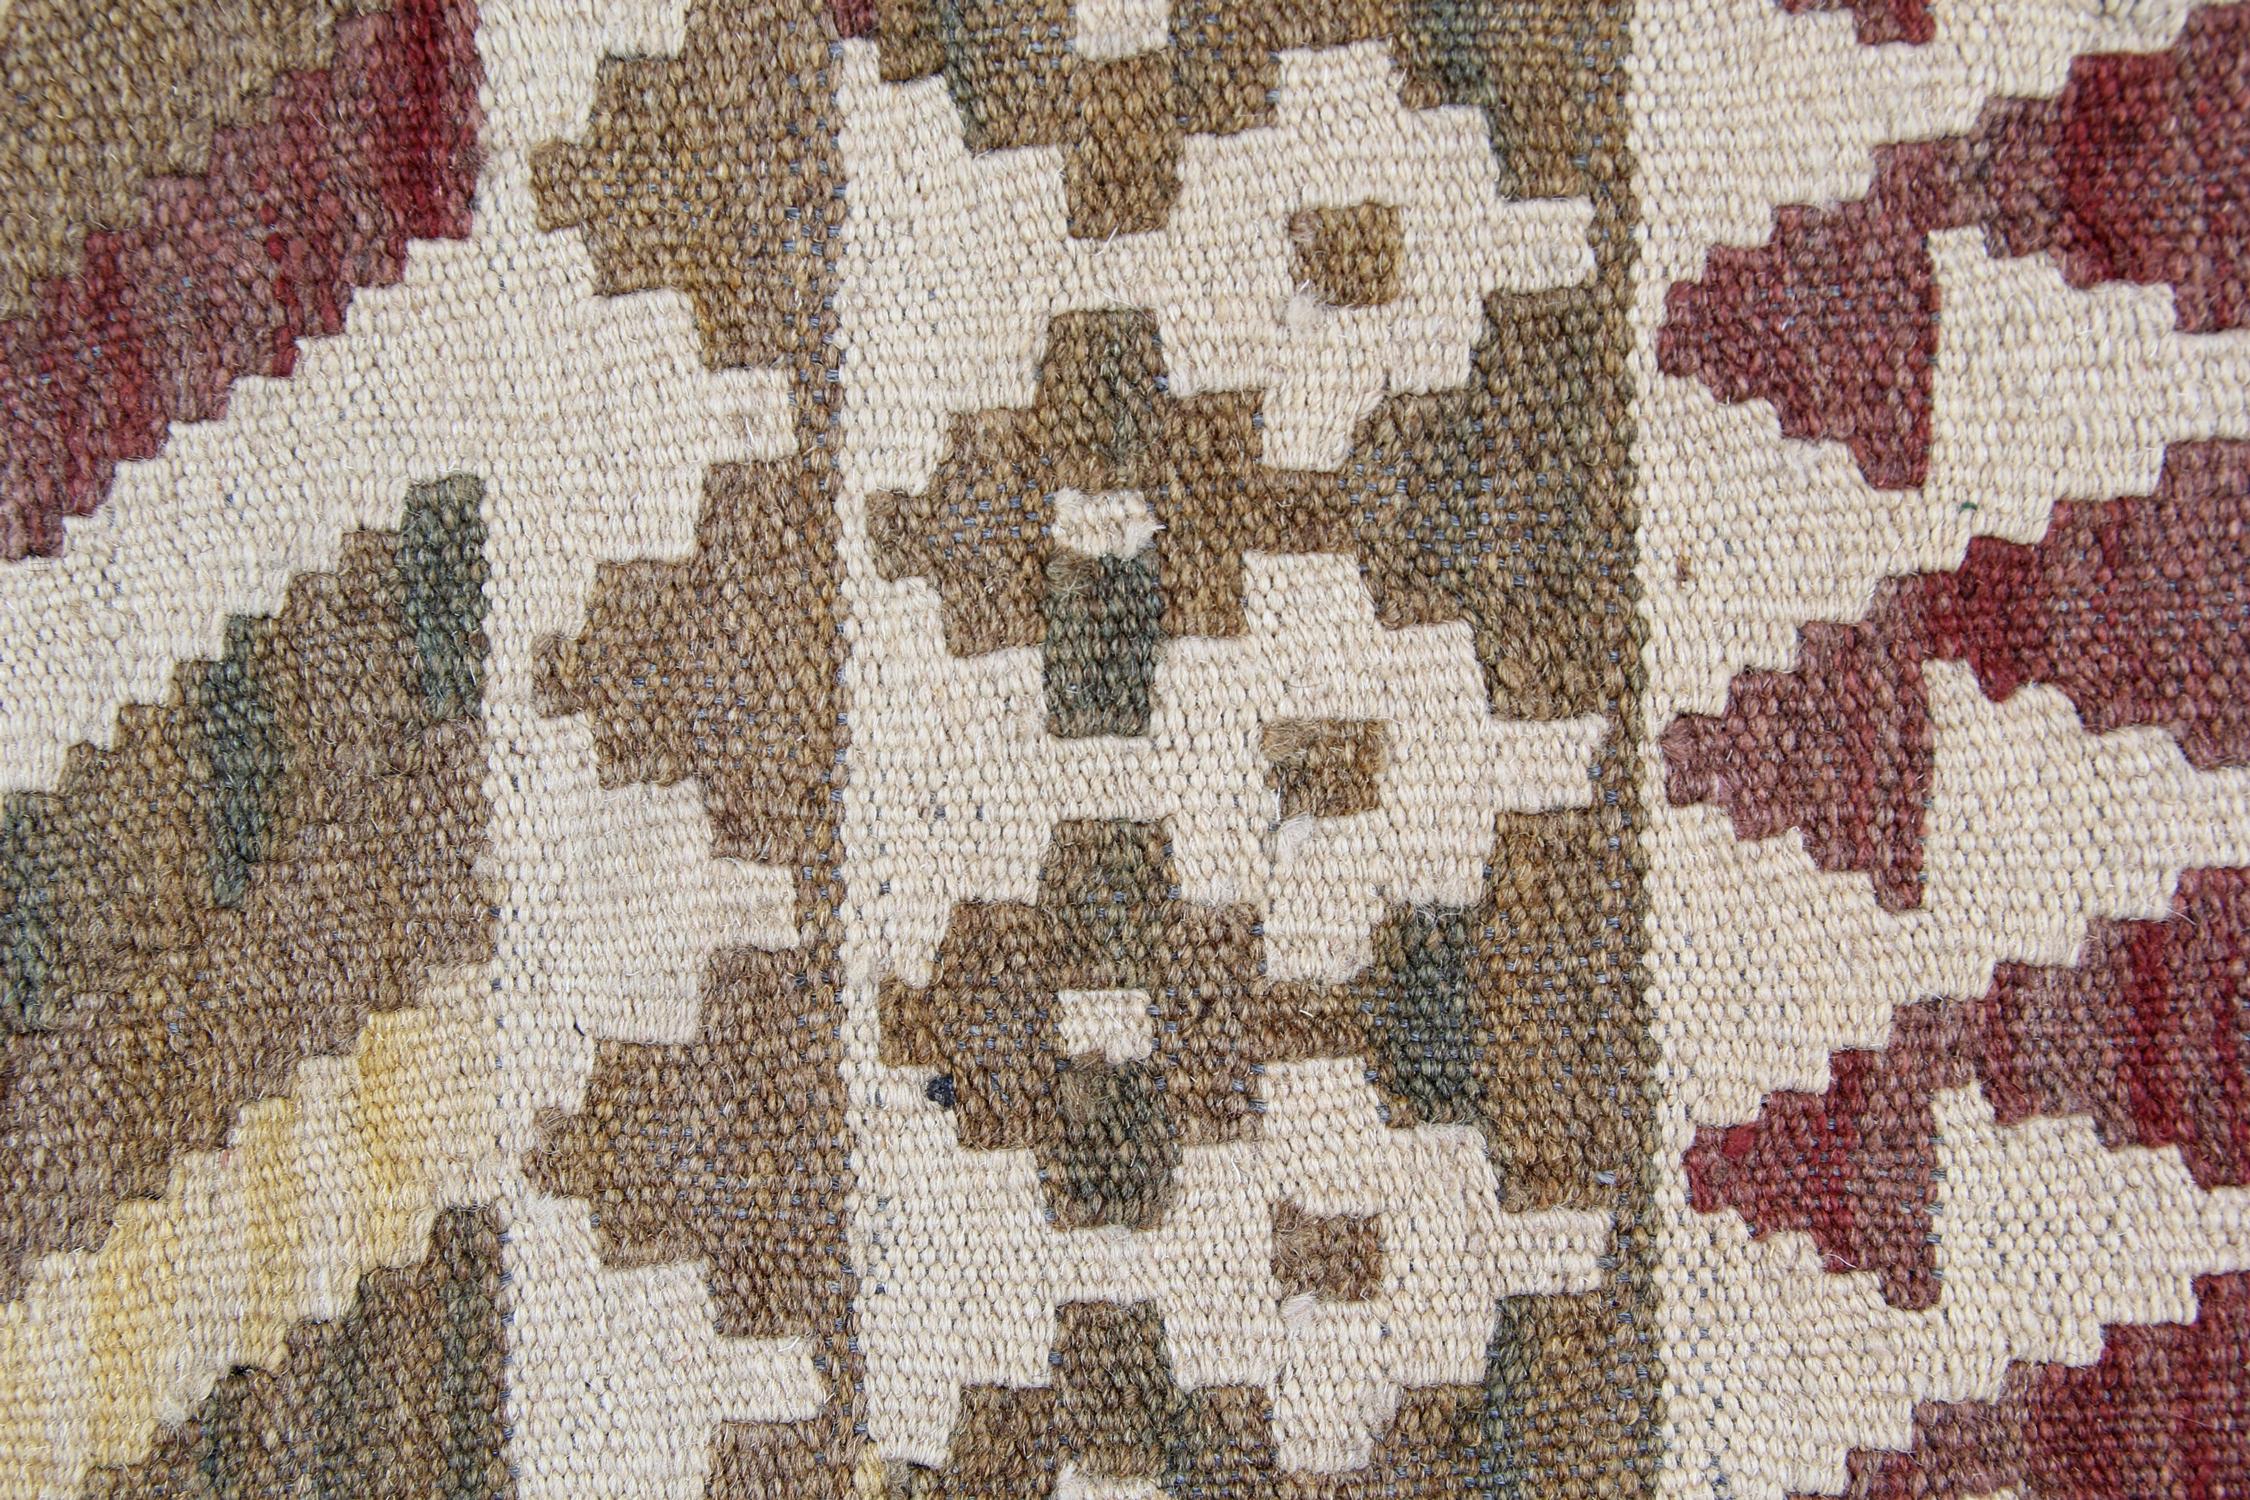 Tribal Kilim Rug, Geometric Vintage Carpet Cream Brown Flatweave Rug In Excellent Condition For Sale In Hampshire, GB